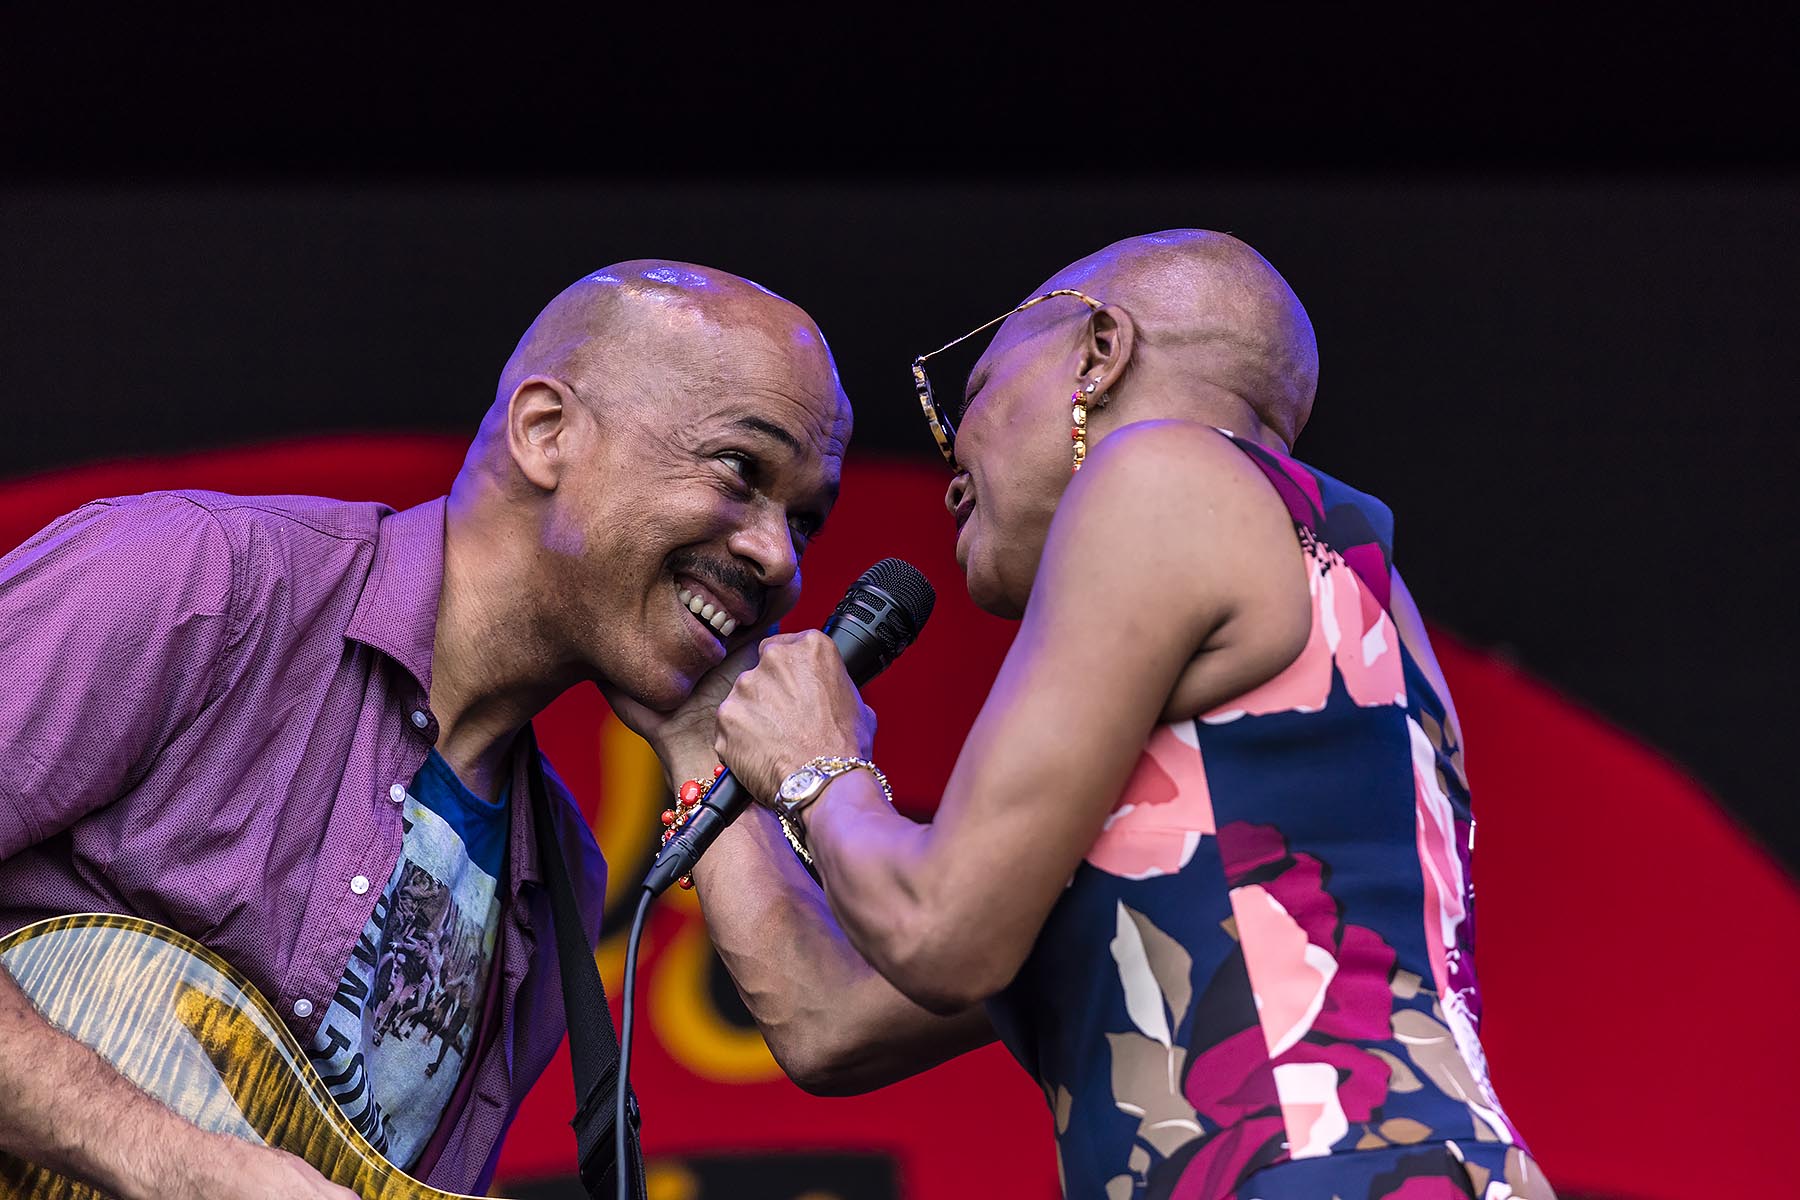 CHARLTON JOHNSON on guitar with DEE DEE BRIDGEWATER singing with her new band MEMPHIS - MONTEREY JAZZ FESTIVAL, CALIFORNIA